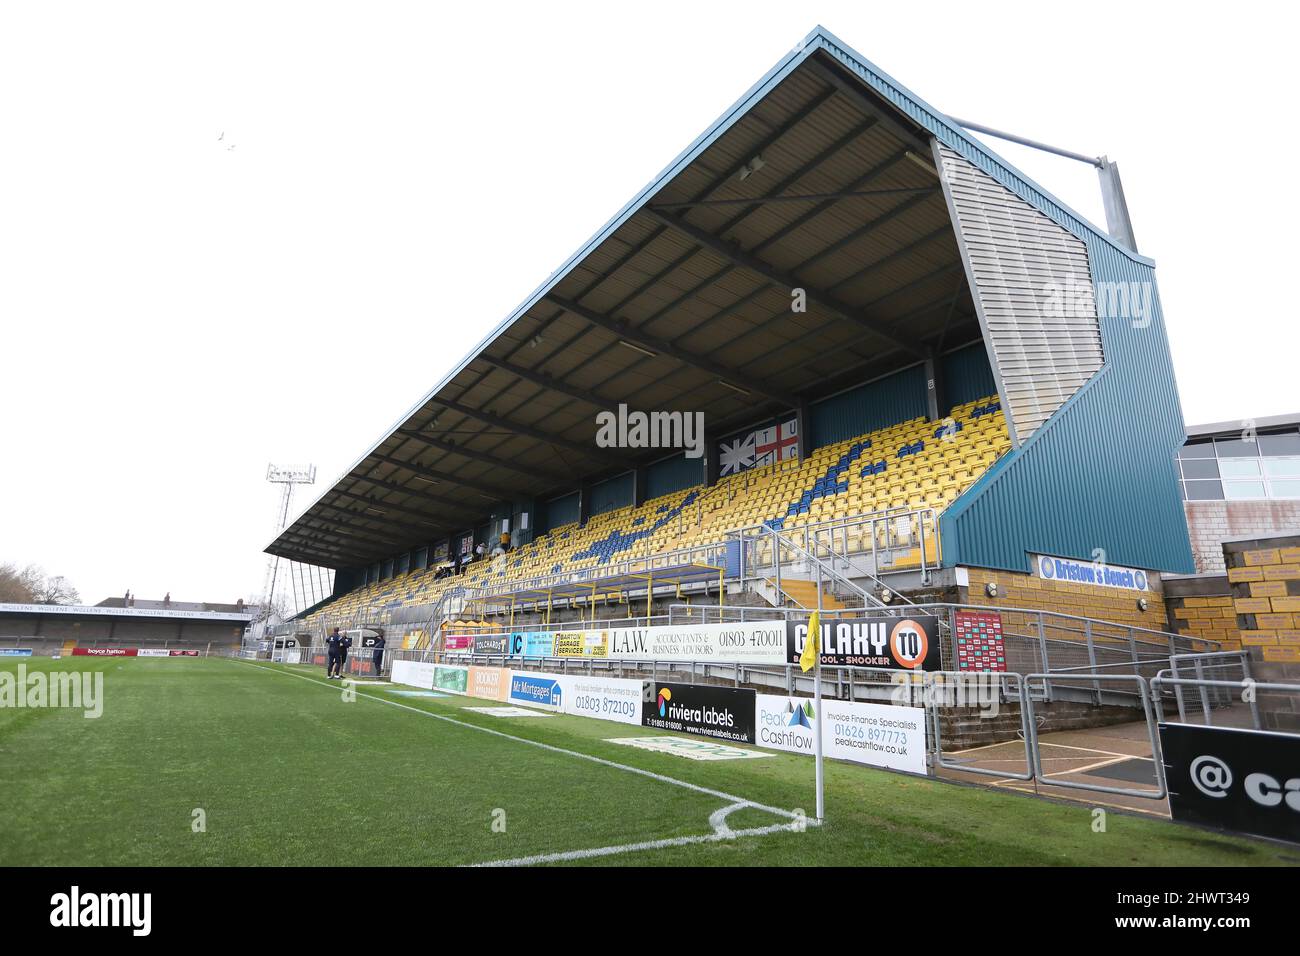 General view of the  First round of the Emirates FA Cup between Torquay United and Crawley Town at Plainmoor, Torquay.  08 November 2020 Stock Photo